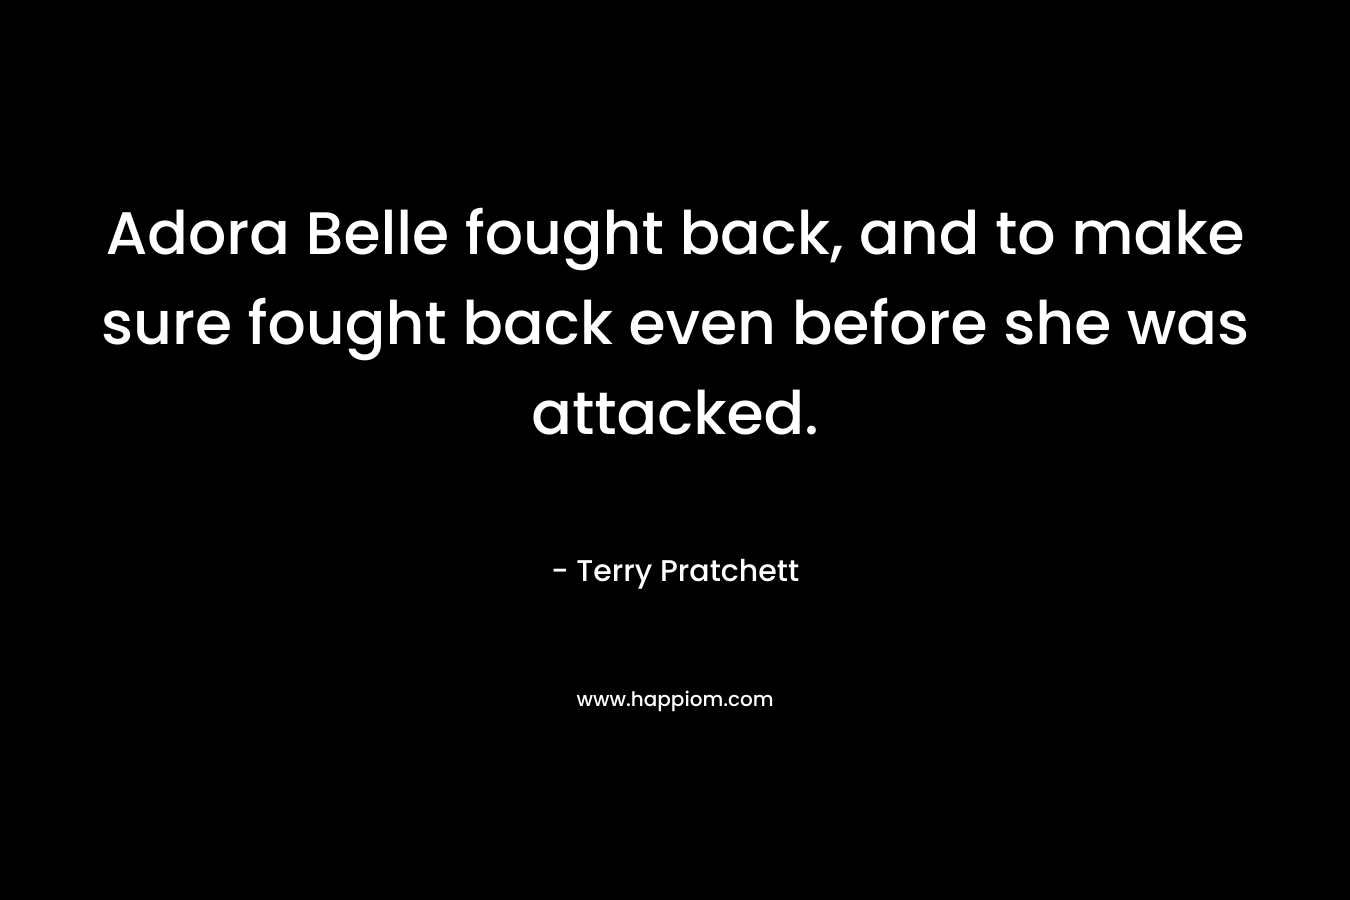 Adora Belle fought back, and to make sure fought back even before she was attacked. – Terry Pratchett